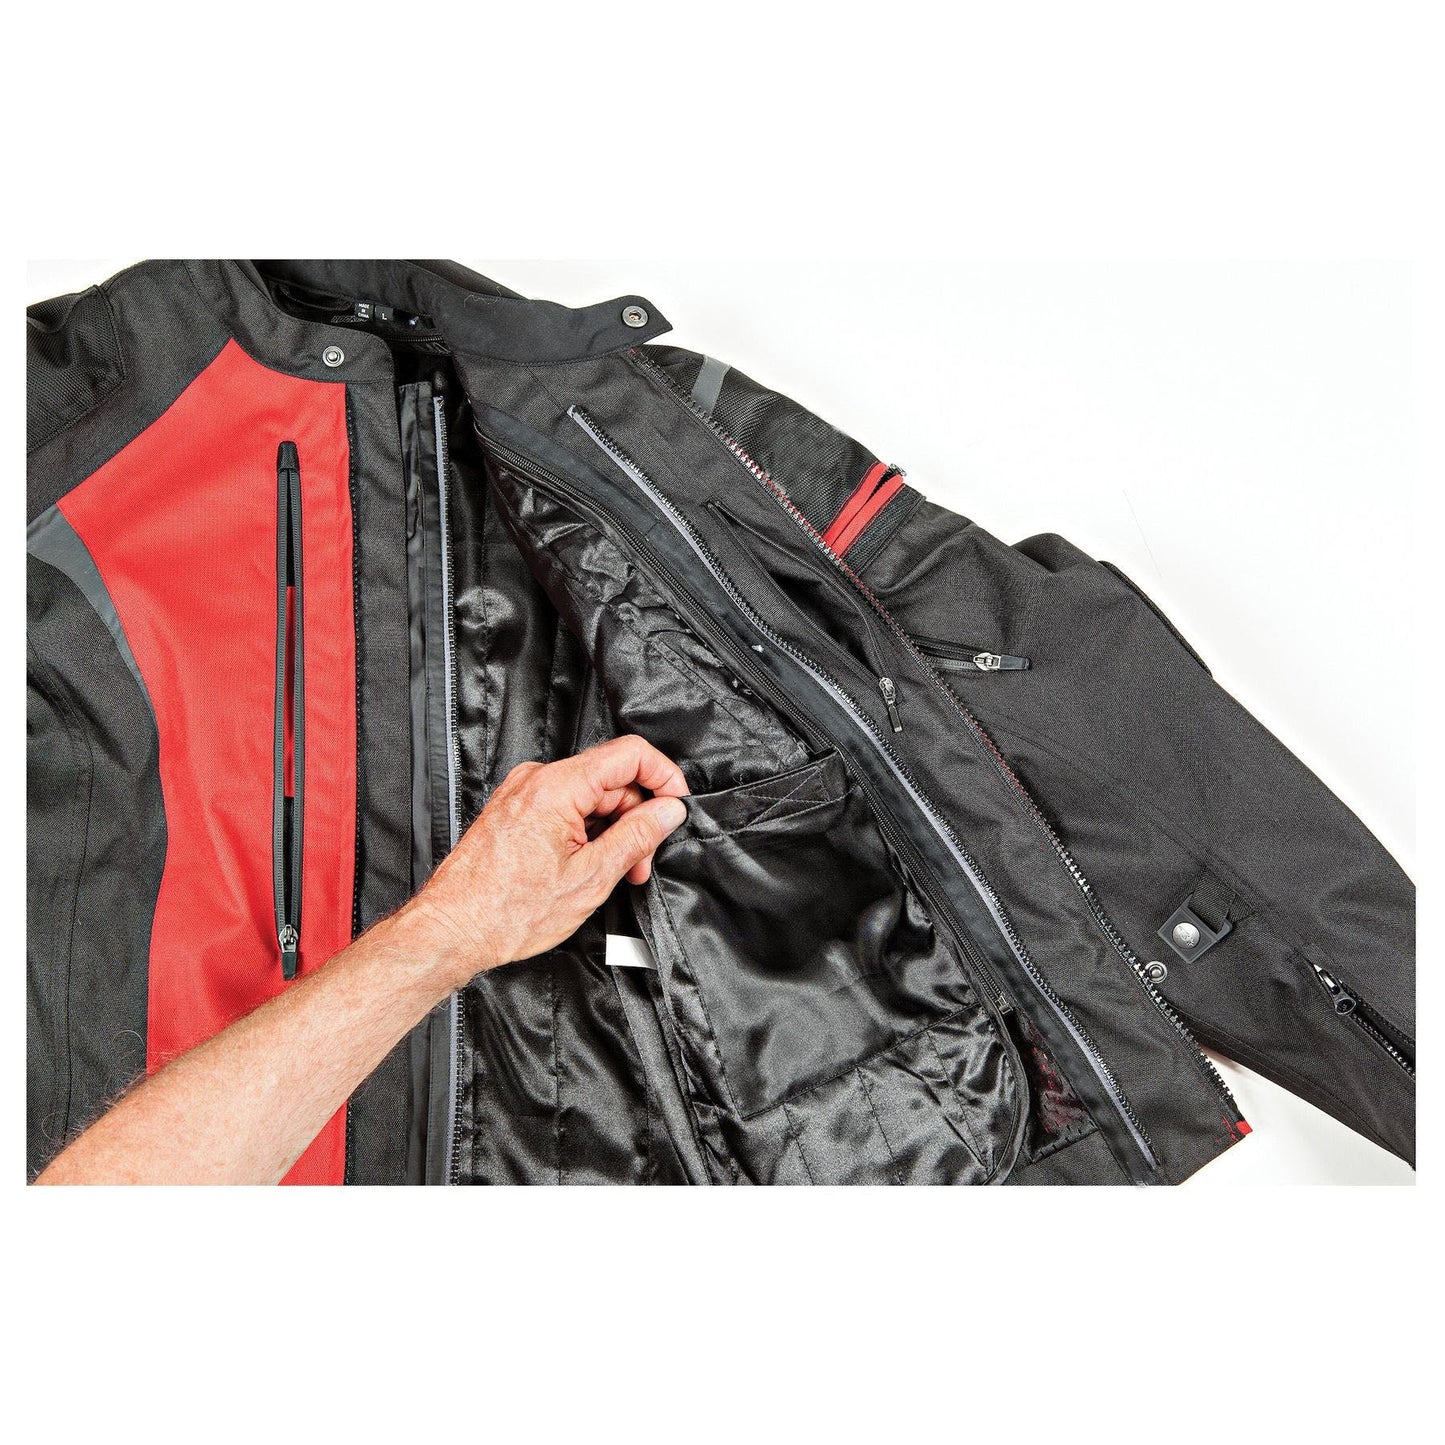 Red/Black Touring Motorbike Textile CE Armor Cordura Jacket - All Colors Available - Unisex